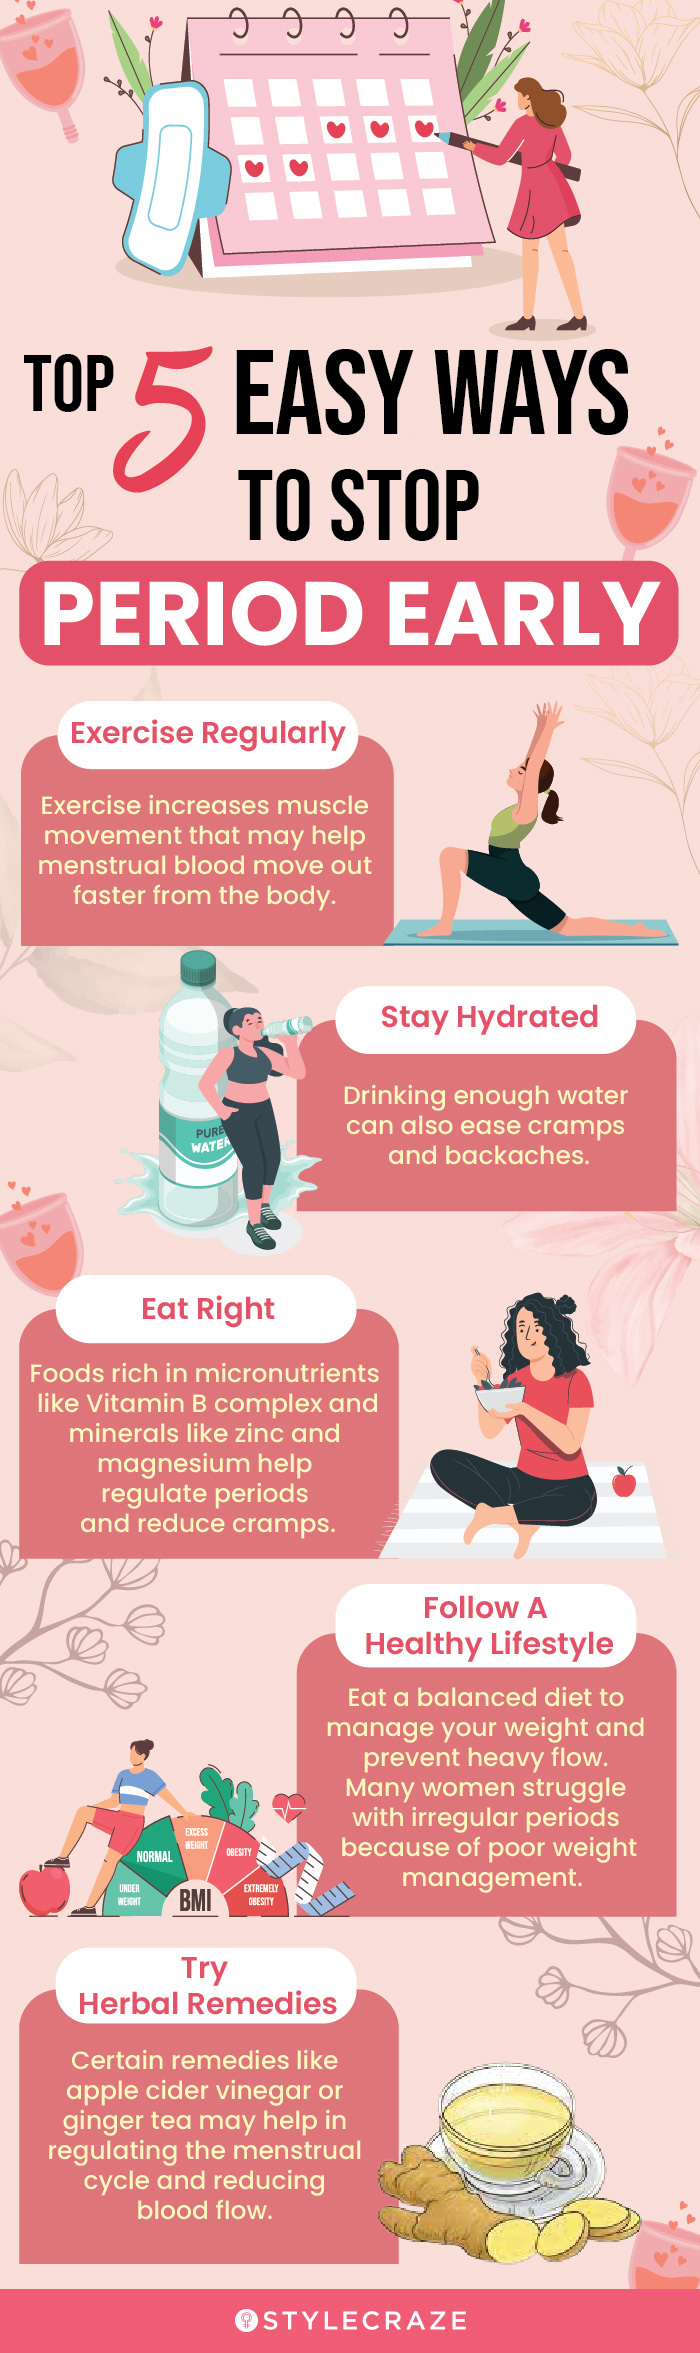 top 5 easy ways to stop period early (infographic)